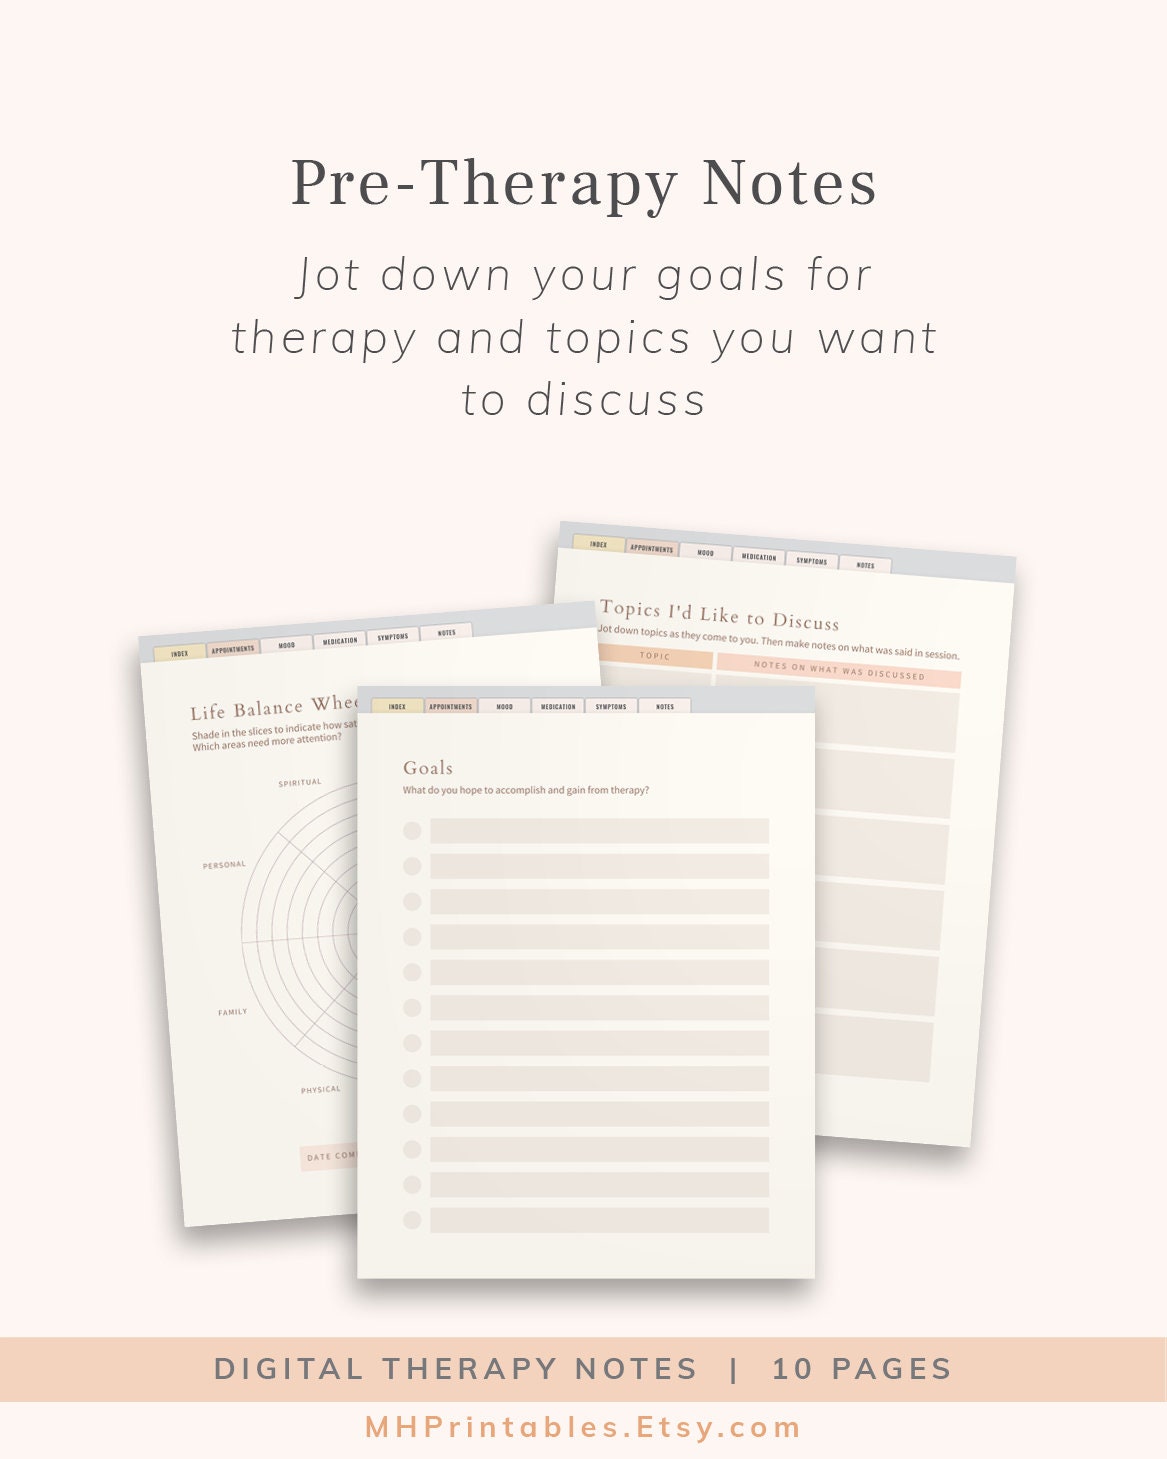 Digital Therapy Journal and Notebook Session Meeting Notes - Etsy